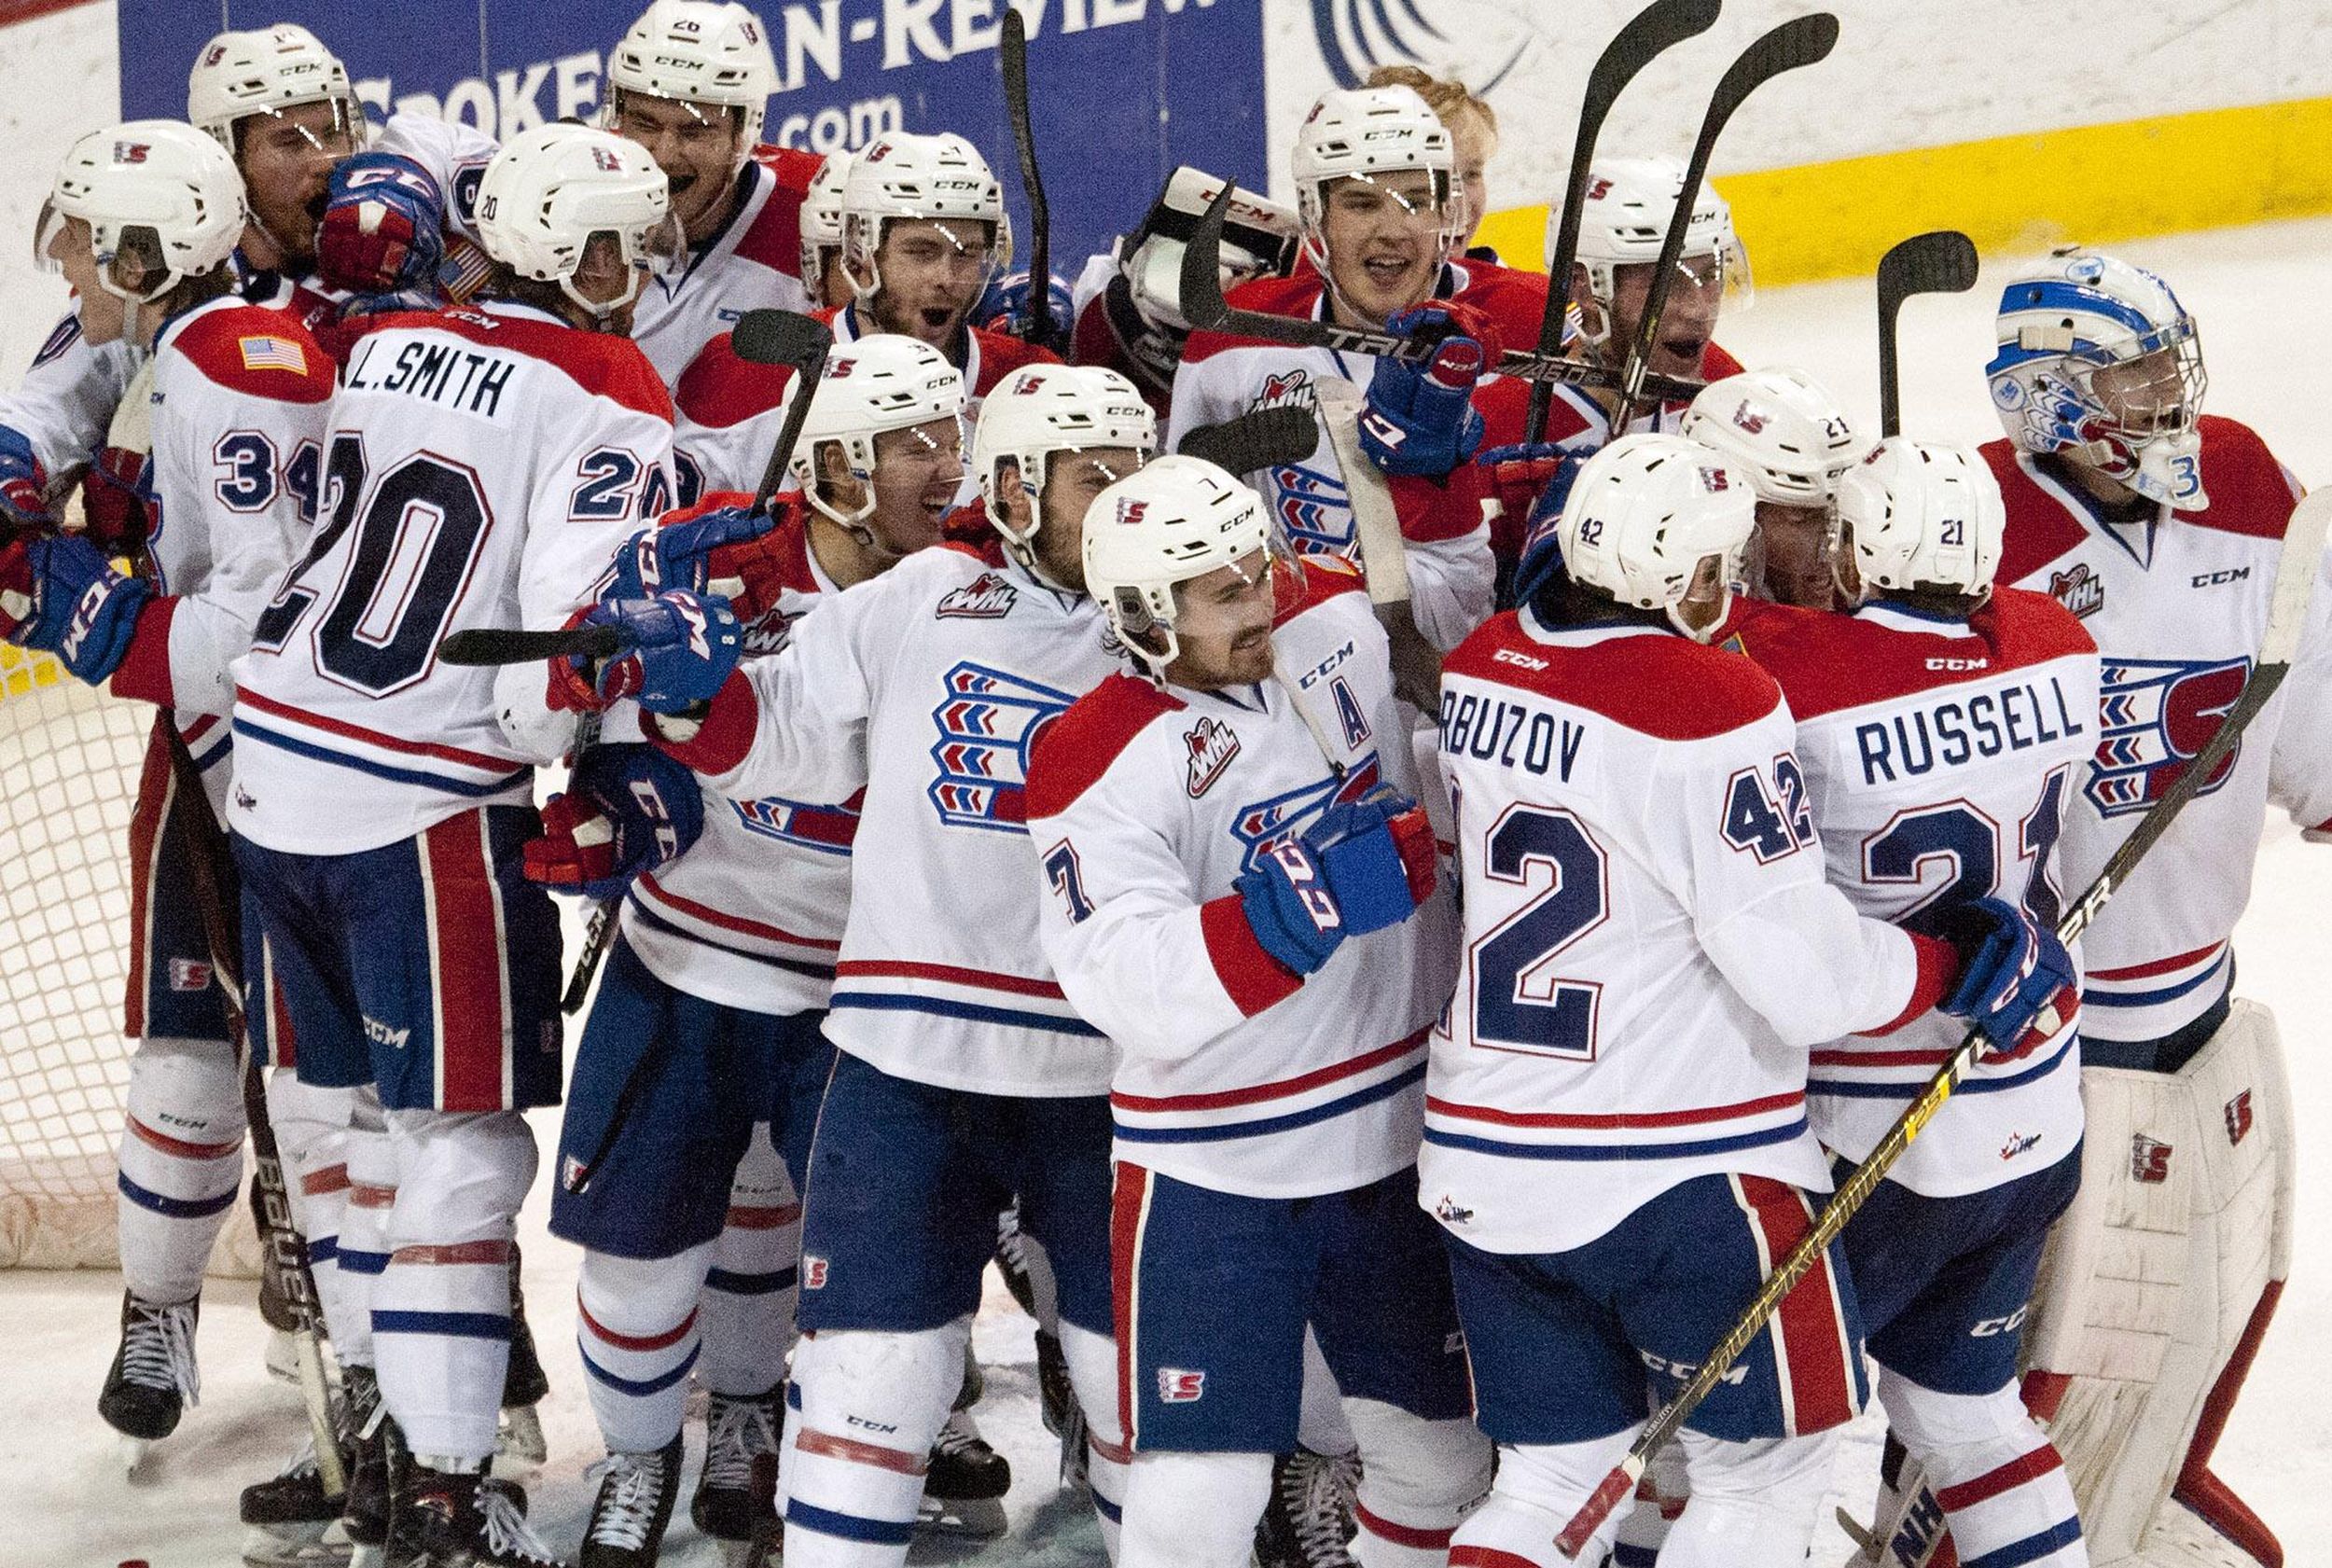 Spokane Chiefs move to Western Conference final after completing series